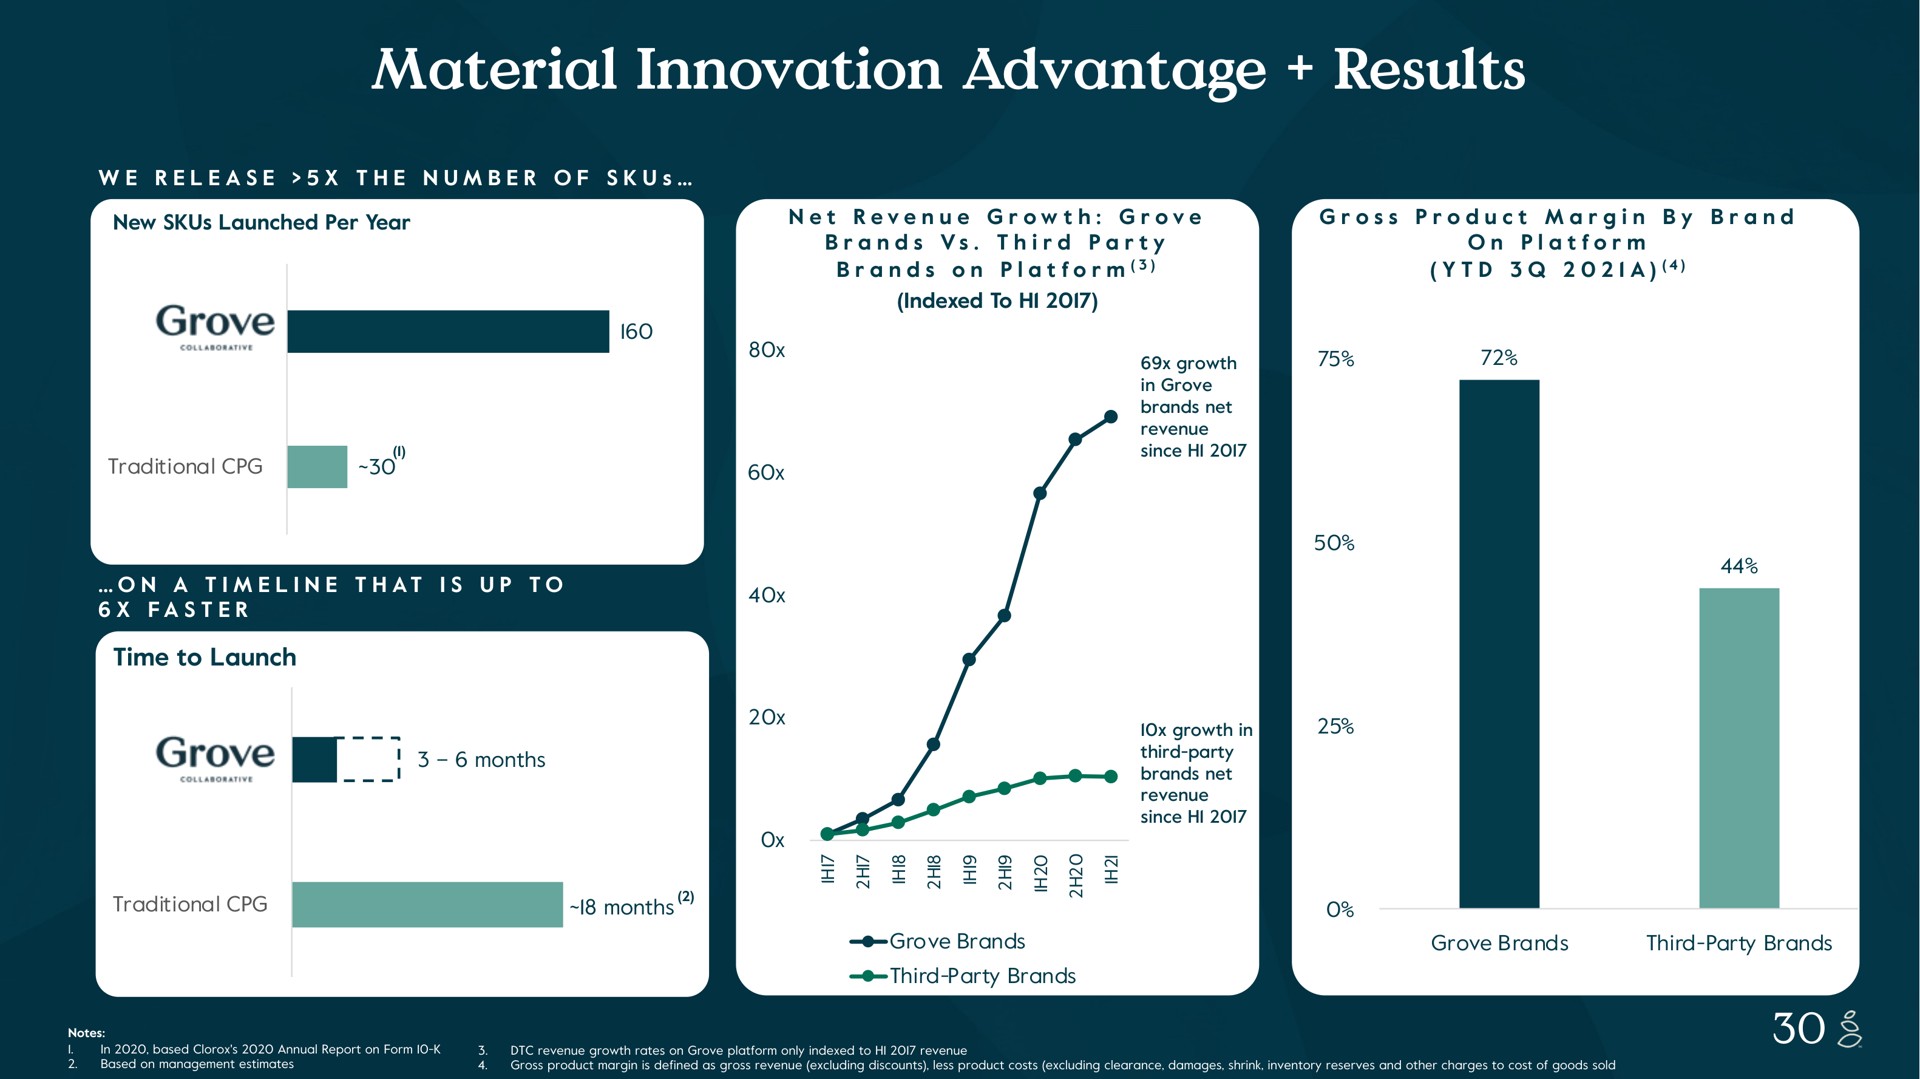 material innovation advantage results we release the number of new launched per year grove i traditional net revenue growth grove brands third party brands on platform indexed to gross product margin by brand on platform a growth in grove brands net revenue since time to launch grove on a that is up to faster gross product margin is defined as gross revenue excluding discounts less product costs excluding clearance damages shrink inventory reserves and other charges to cost of goods sold in based annual report on form based on management estimates growth in panty brands net revenue growth rates on grove platform only indexed to revenue third party brands third party brands grove brands months revenue since grove brands notes i by | Grove